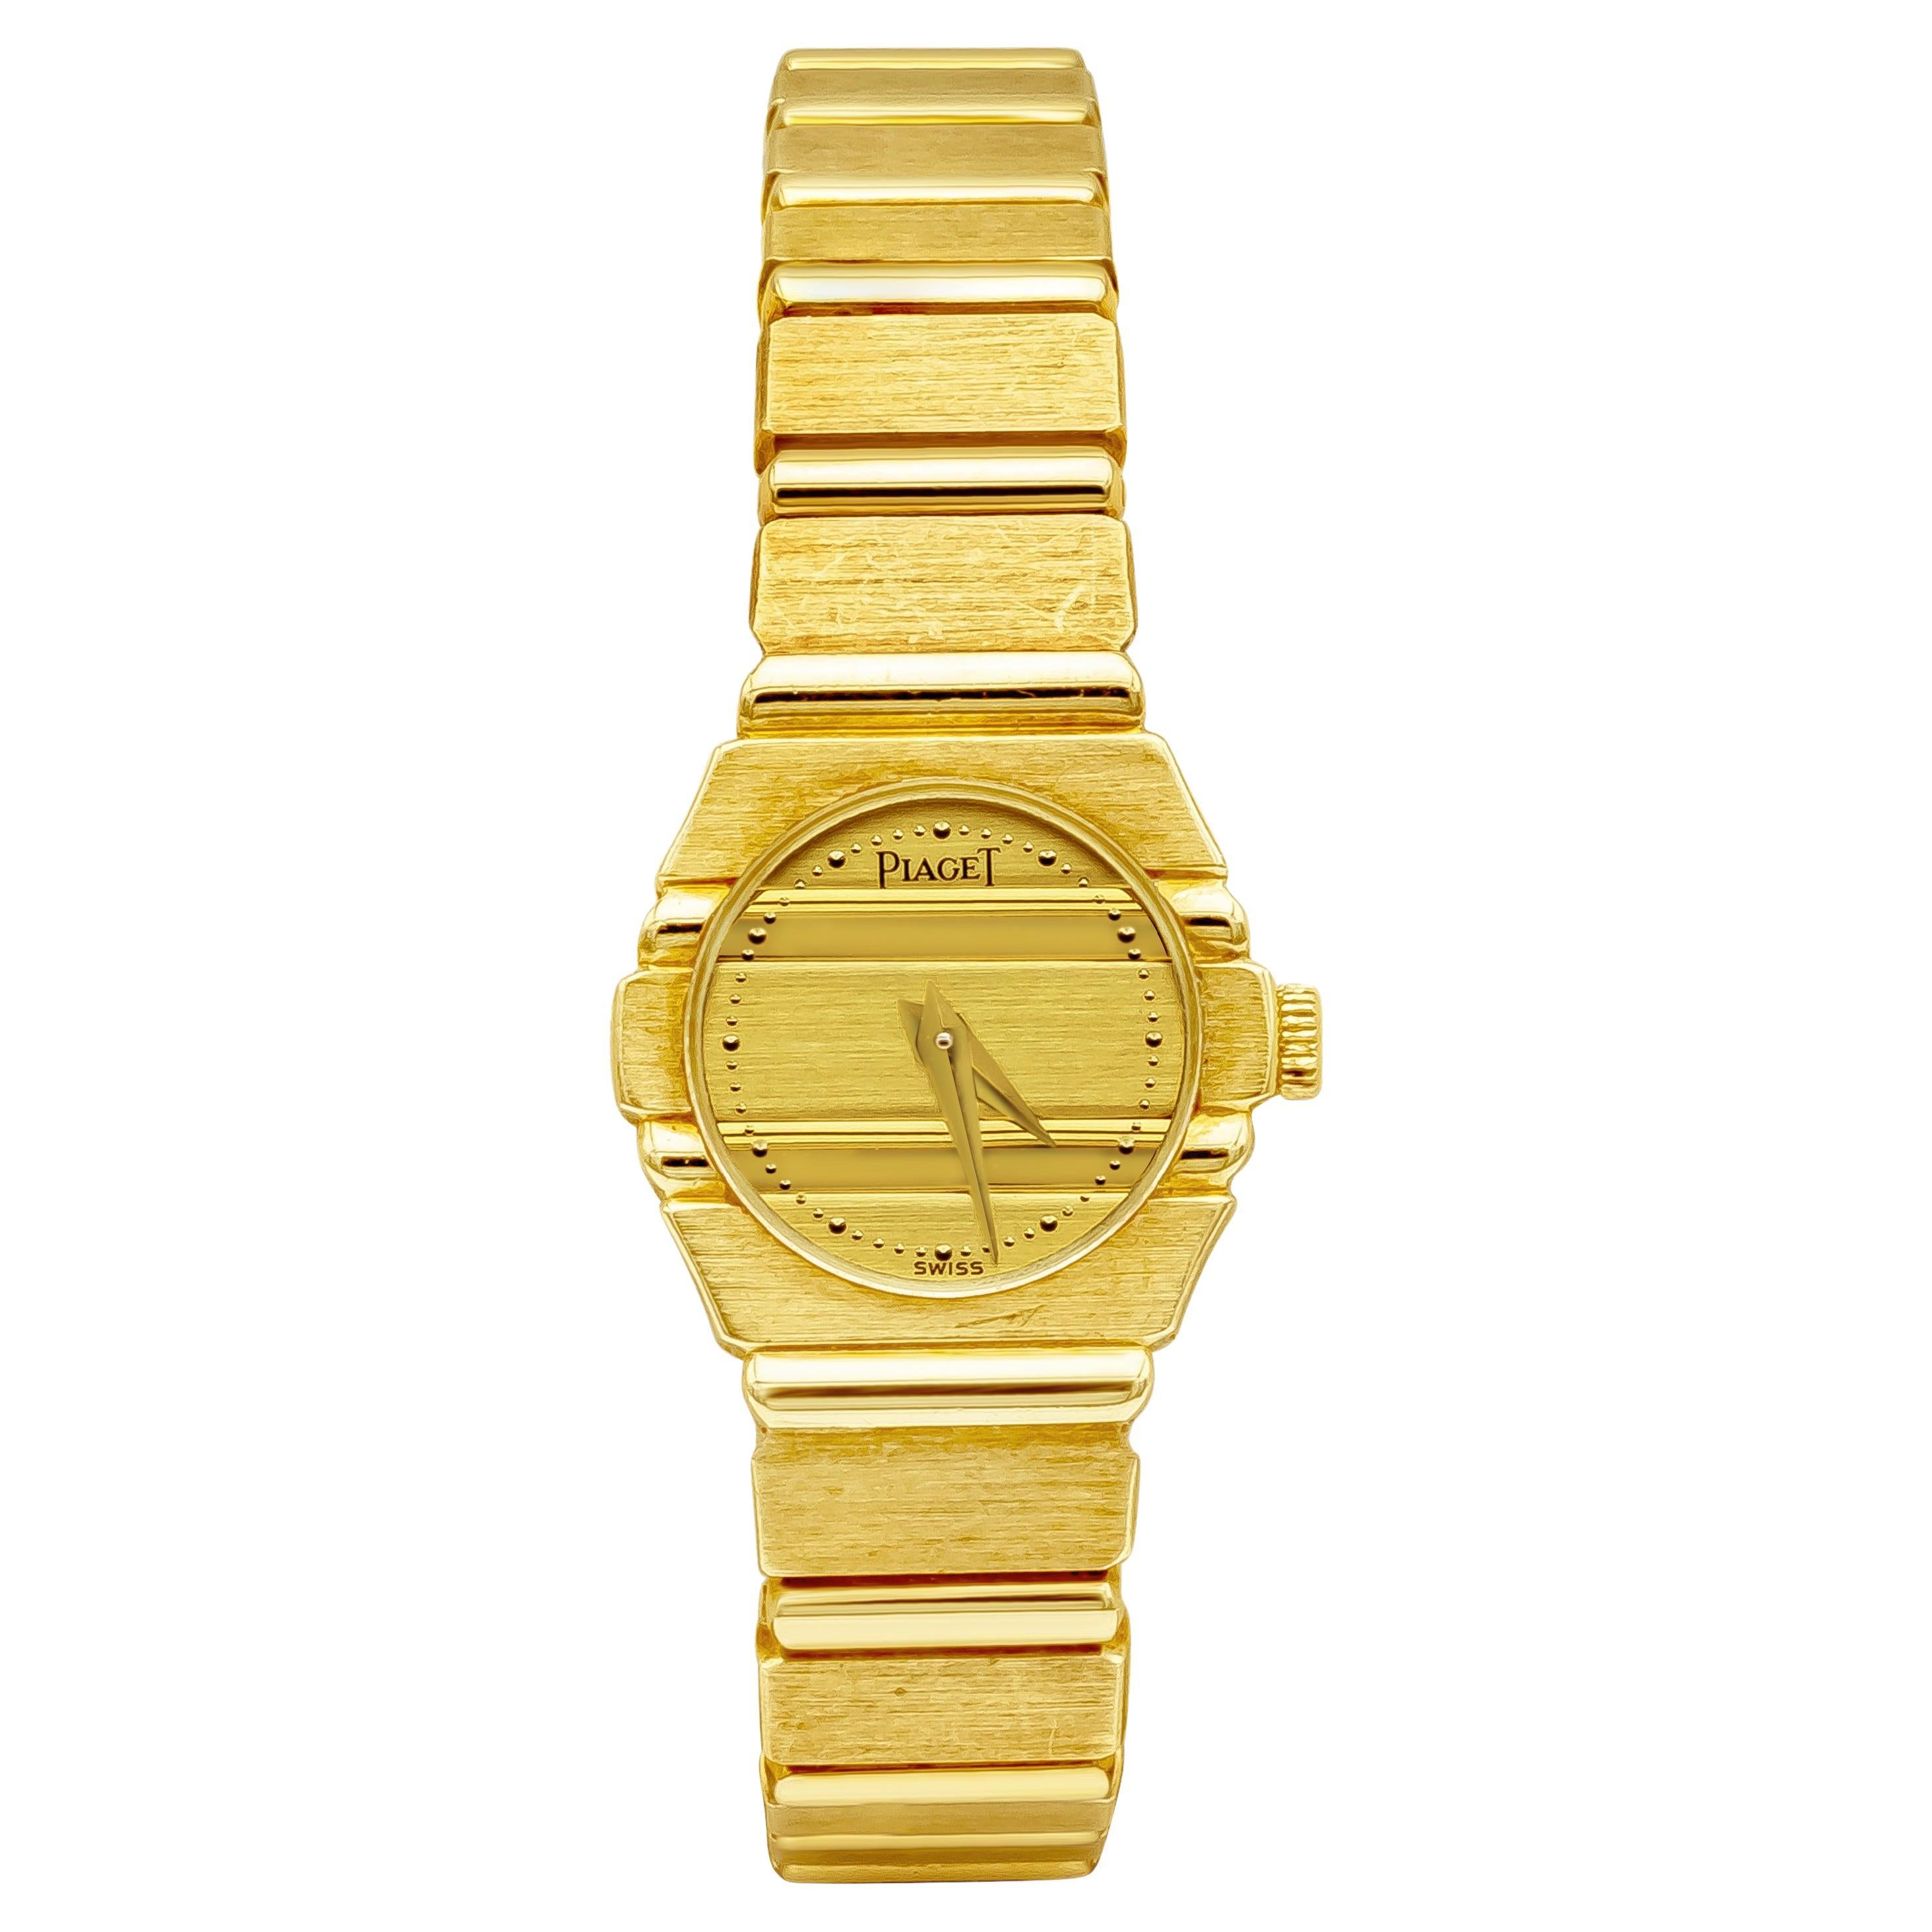 Piaget Polo 841 C701 18K Yellow Gold Ladies Watch For Sale